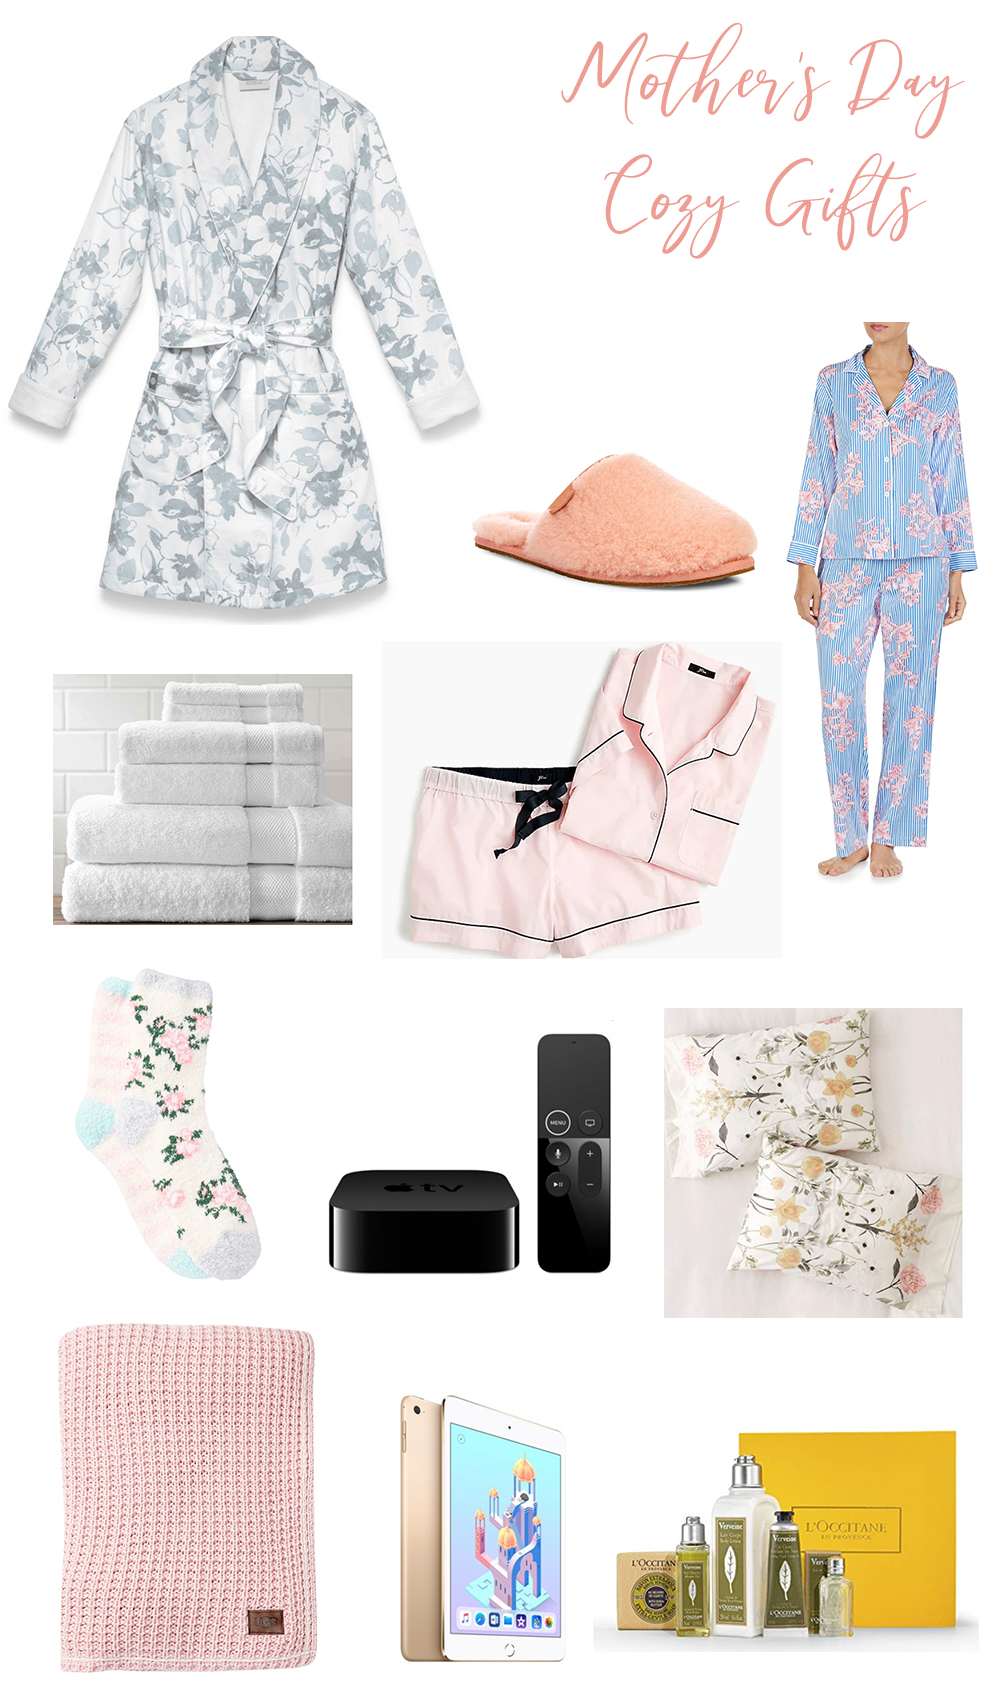 Mother's Day Gifts - The Best Guide of 2019! Everything from home decor, cozy gifts, fashion & accessories, to beauty.. we linked something for everyone! | Kristy Wicks